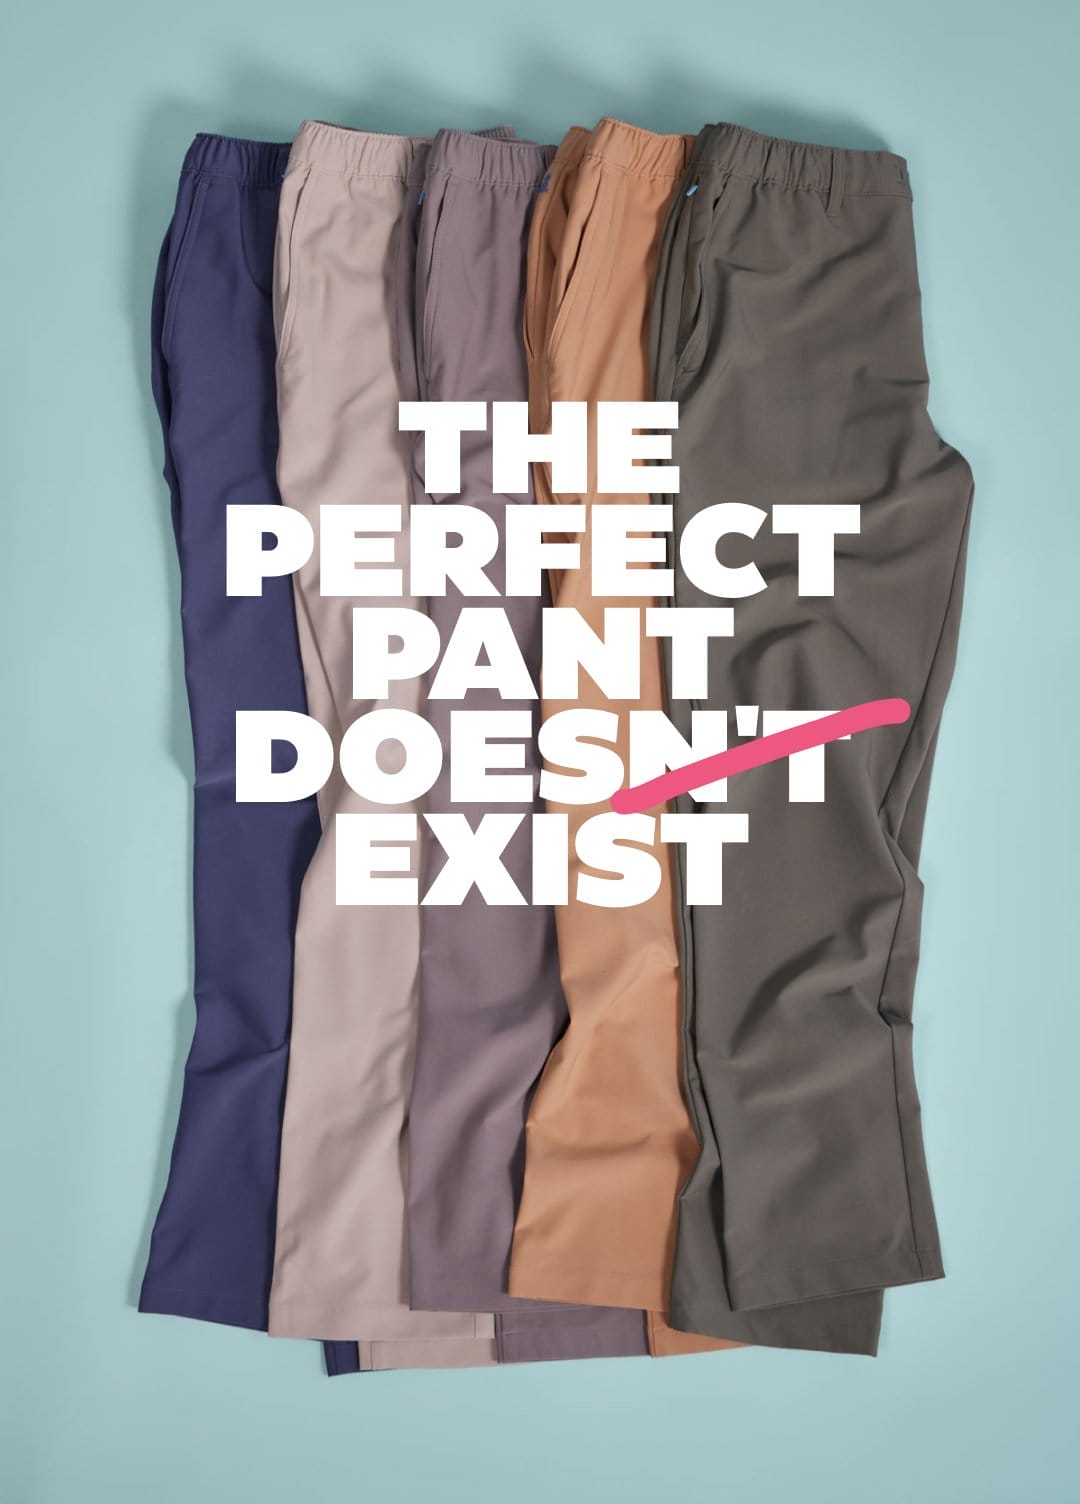 The Perfect Pant Does Exist